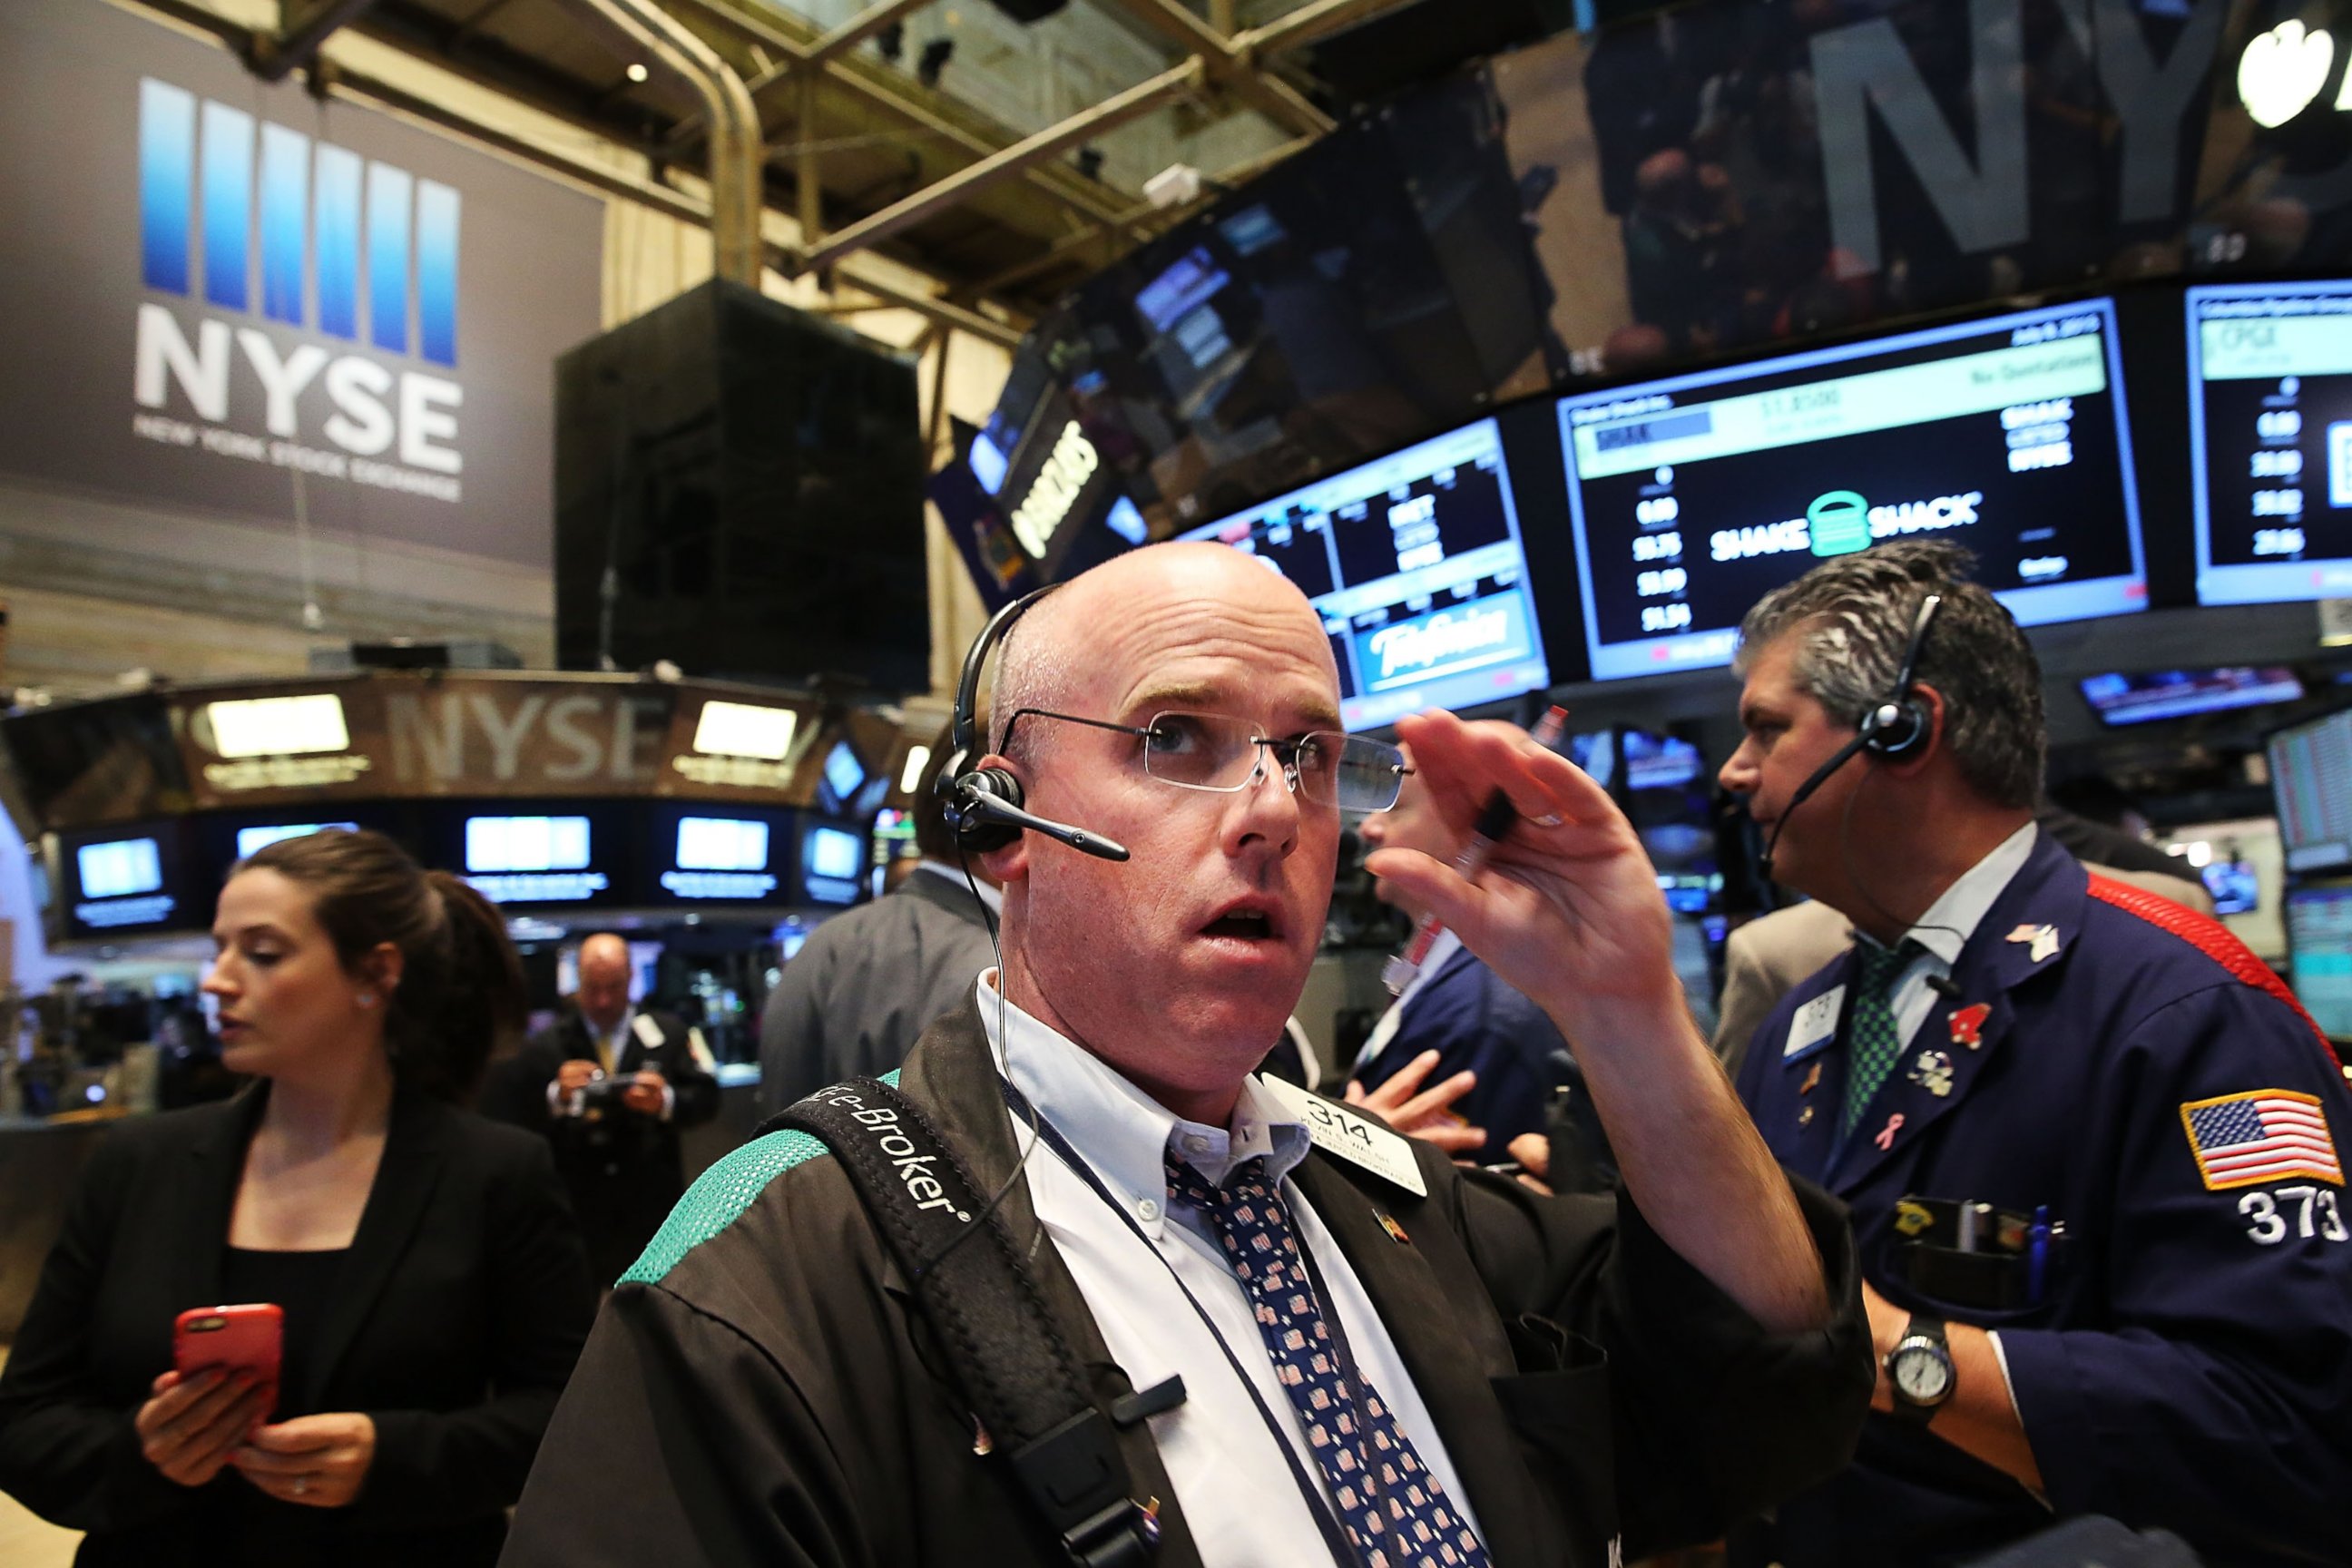 PHOTO: Traders wait for trading to resume on the floor of the New York Stock Exchange after trading was halted due to a "technical glitch" on July 8, 2015 in New York.